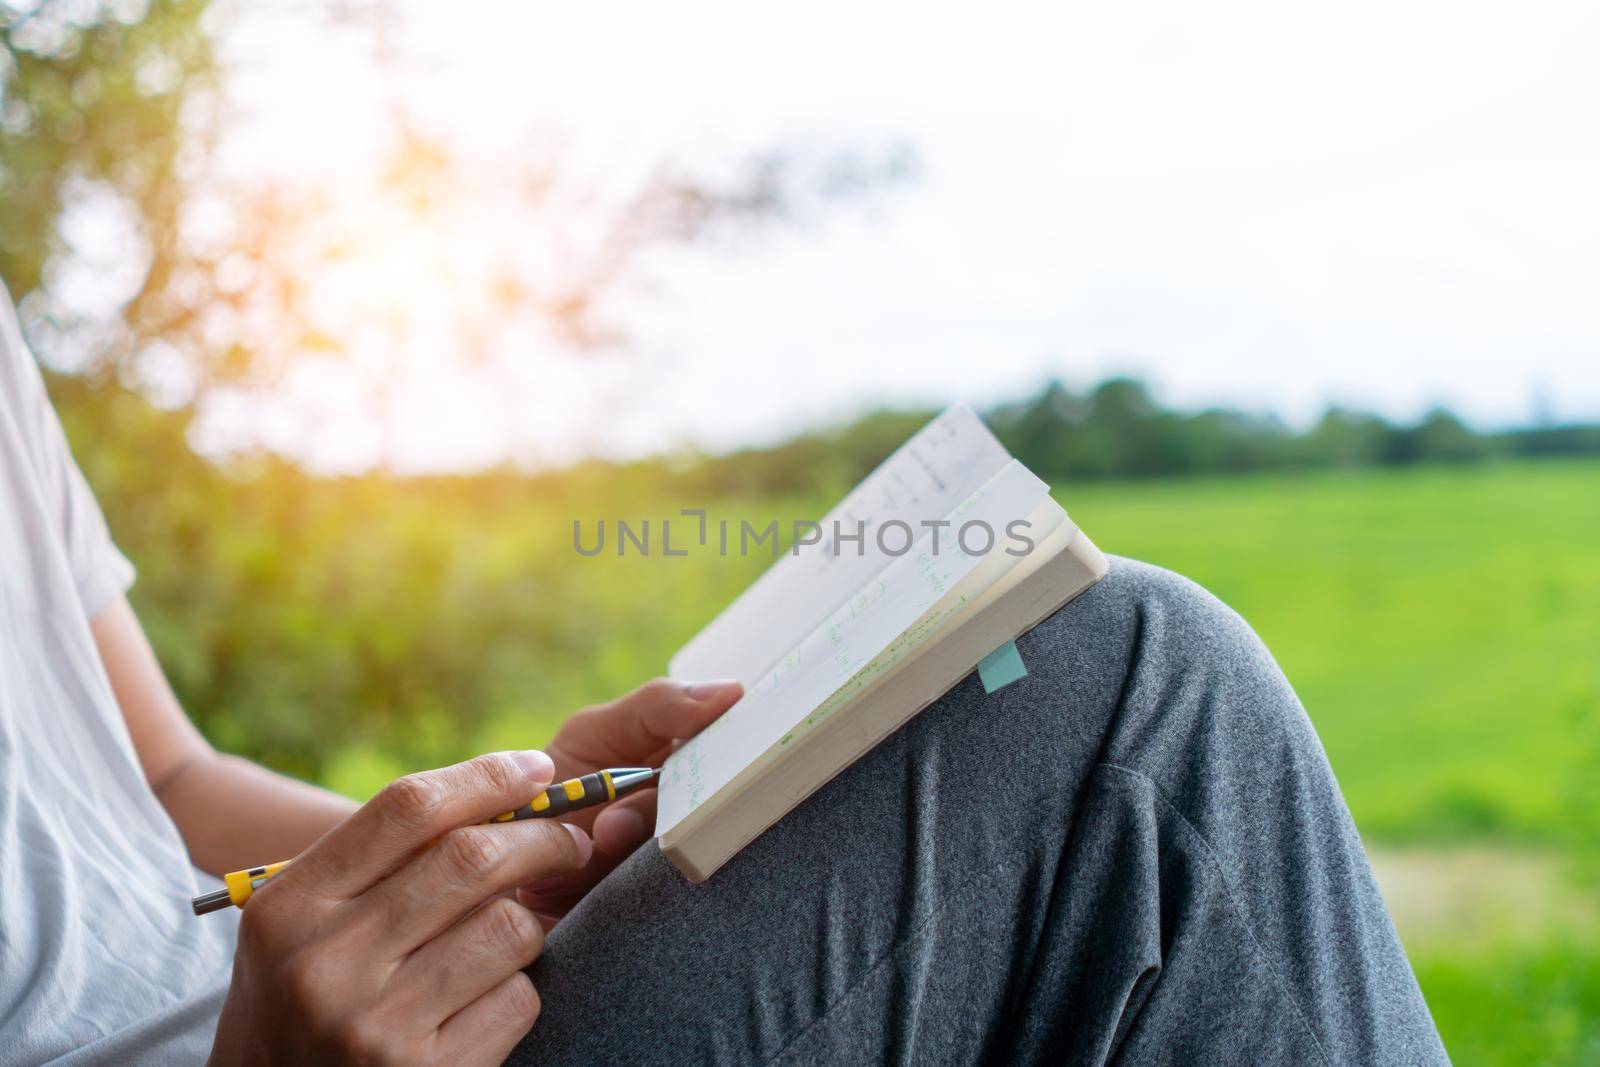 In a public park, a man is handwriting in a small white memo pad to make a note of something he doesn't want to forget or to make a to-do list for the future concept.